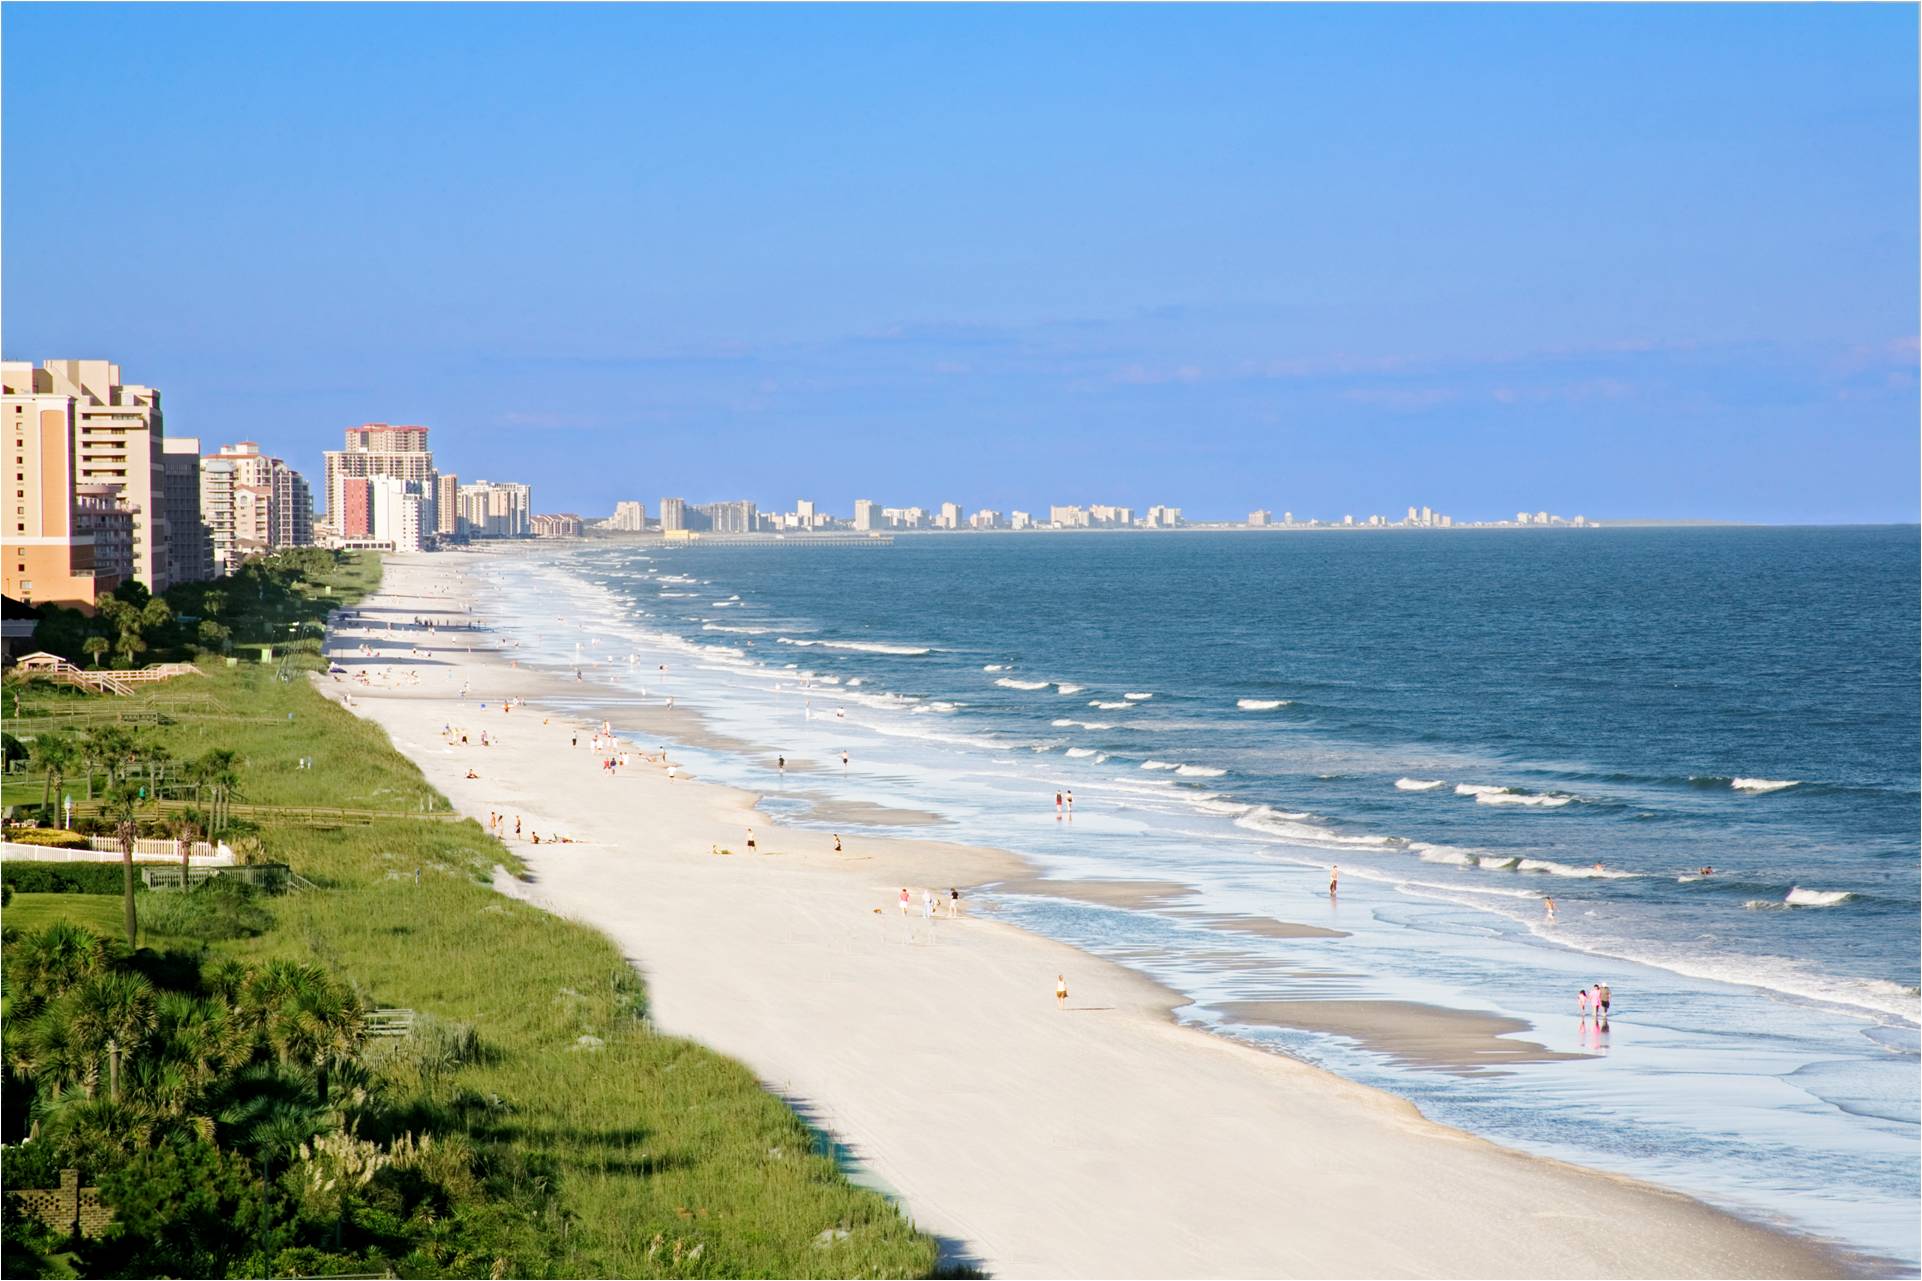 Myrtle Beach, South Carolina, Must-see Tourist Destination During The Summer - T